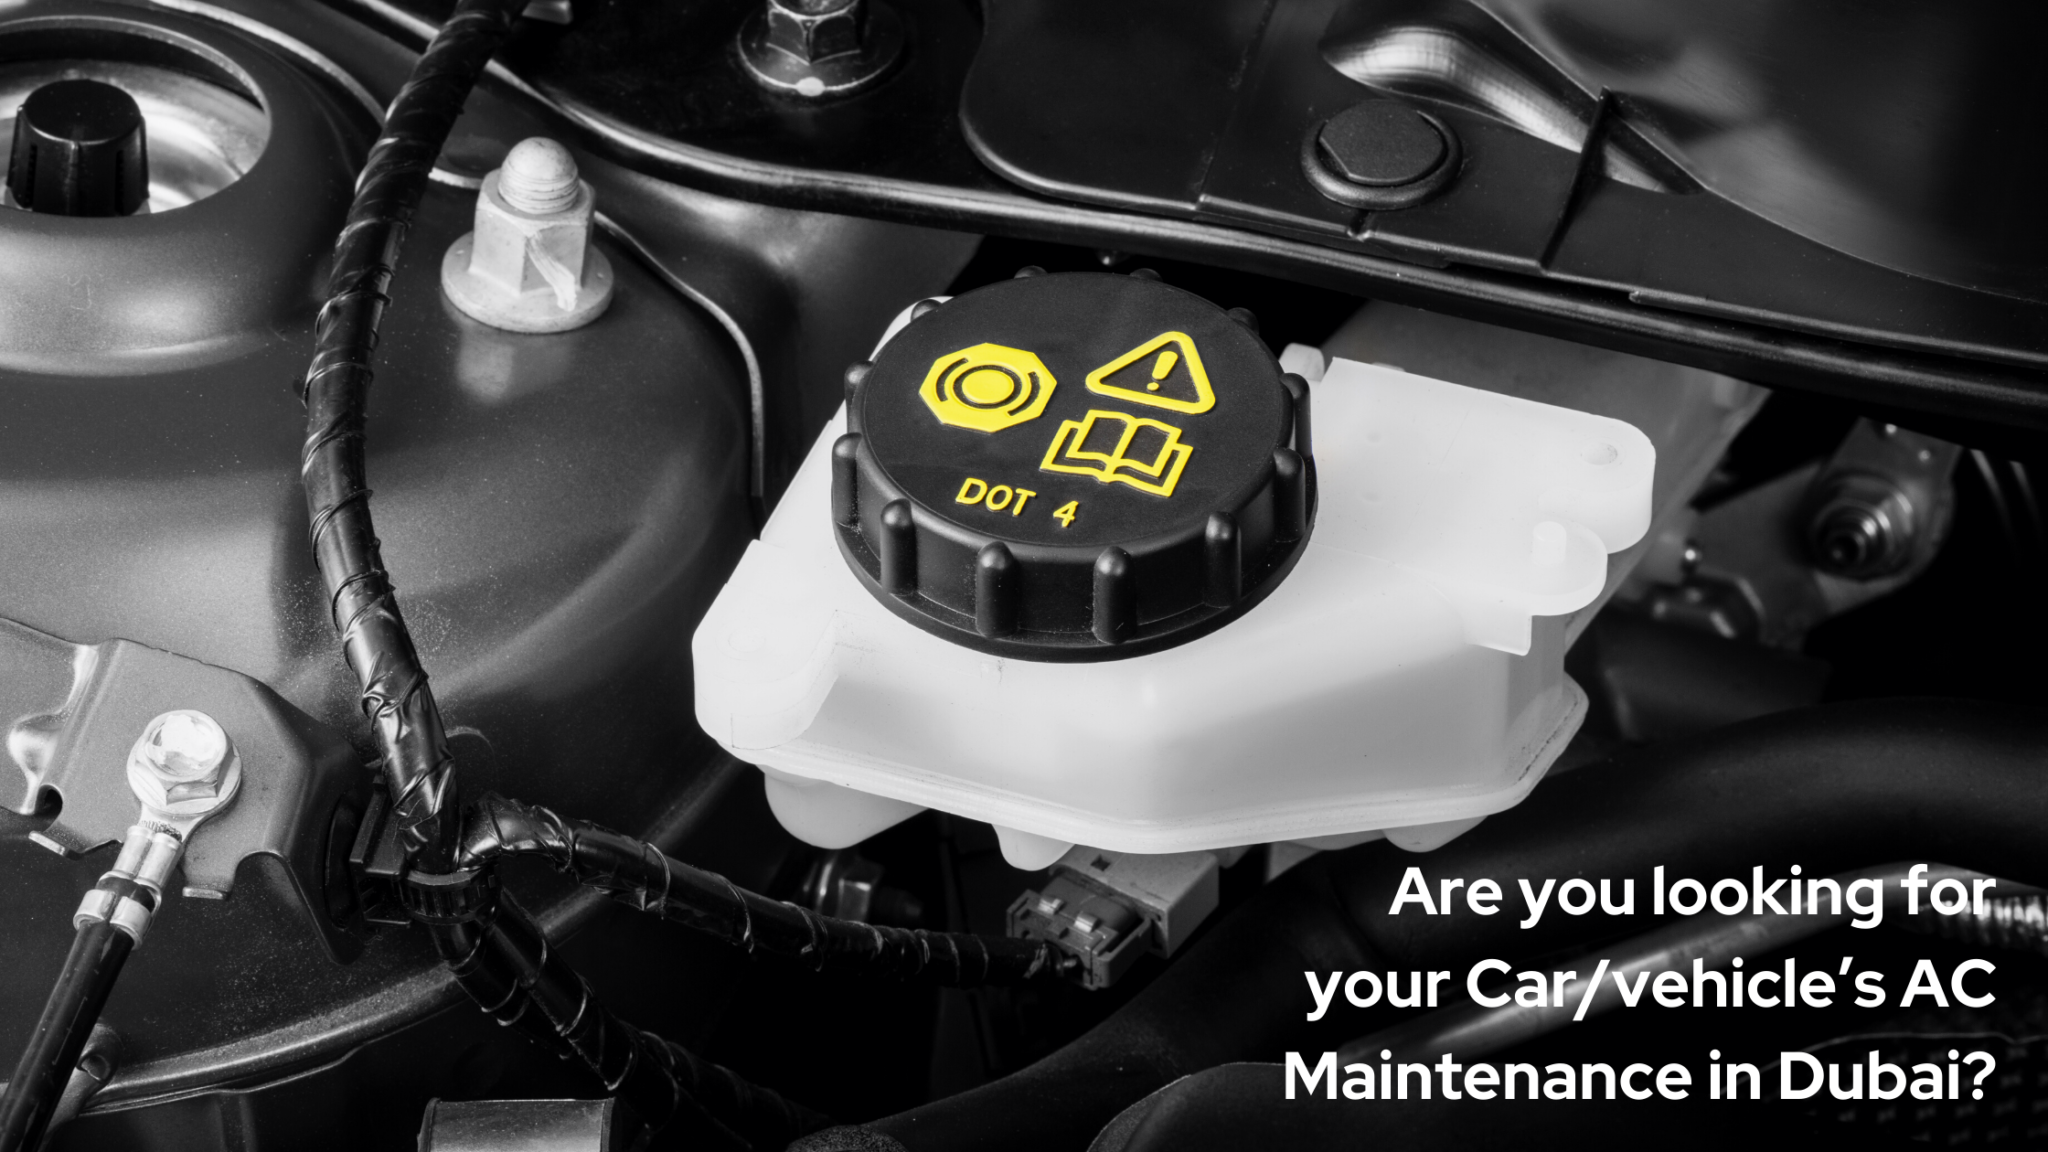 Are you looking for your Car/vehicle’s AC Maintenance in  Dubai?